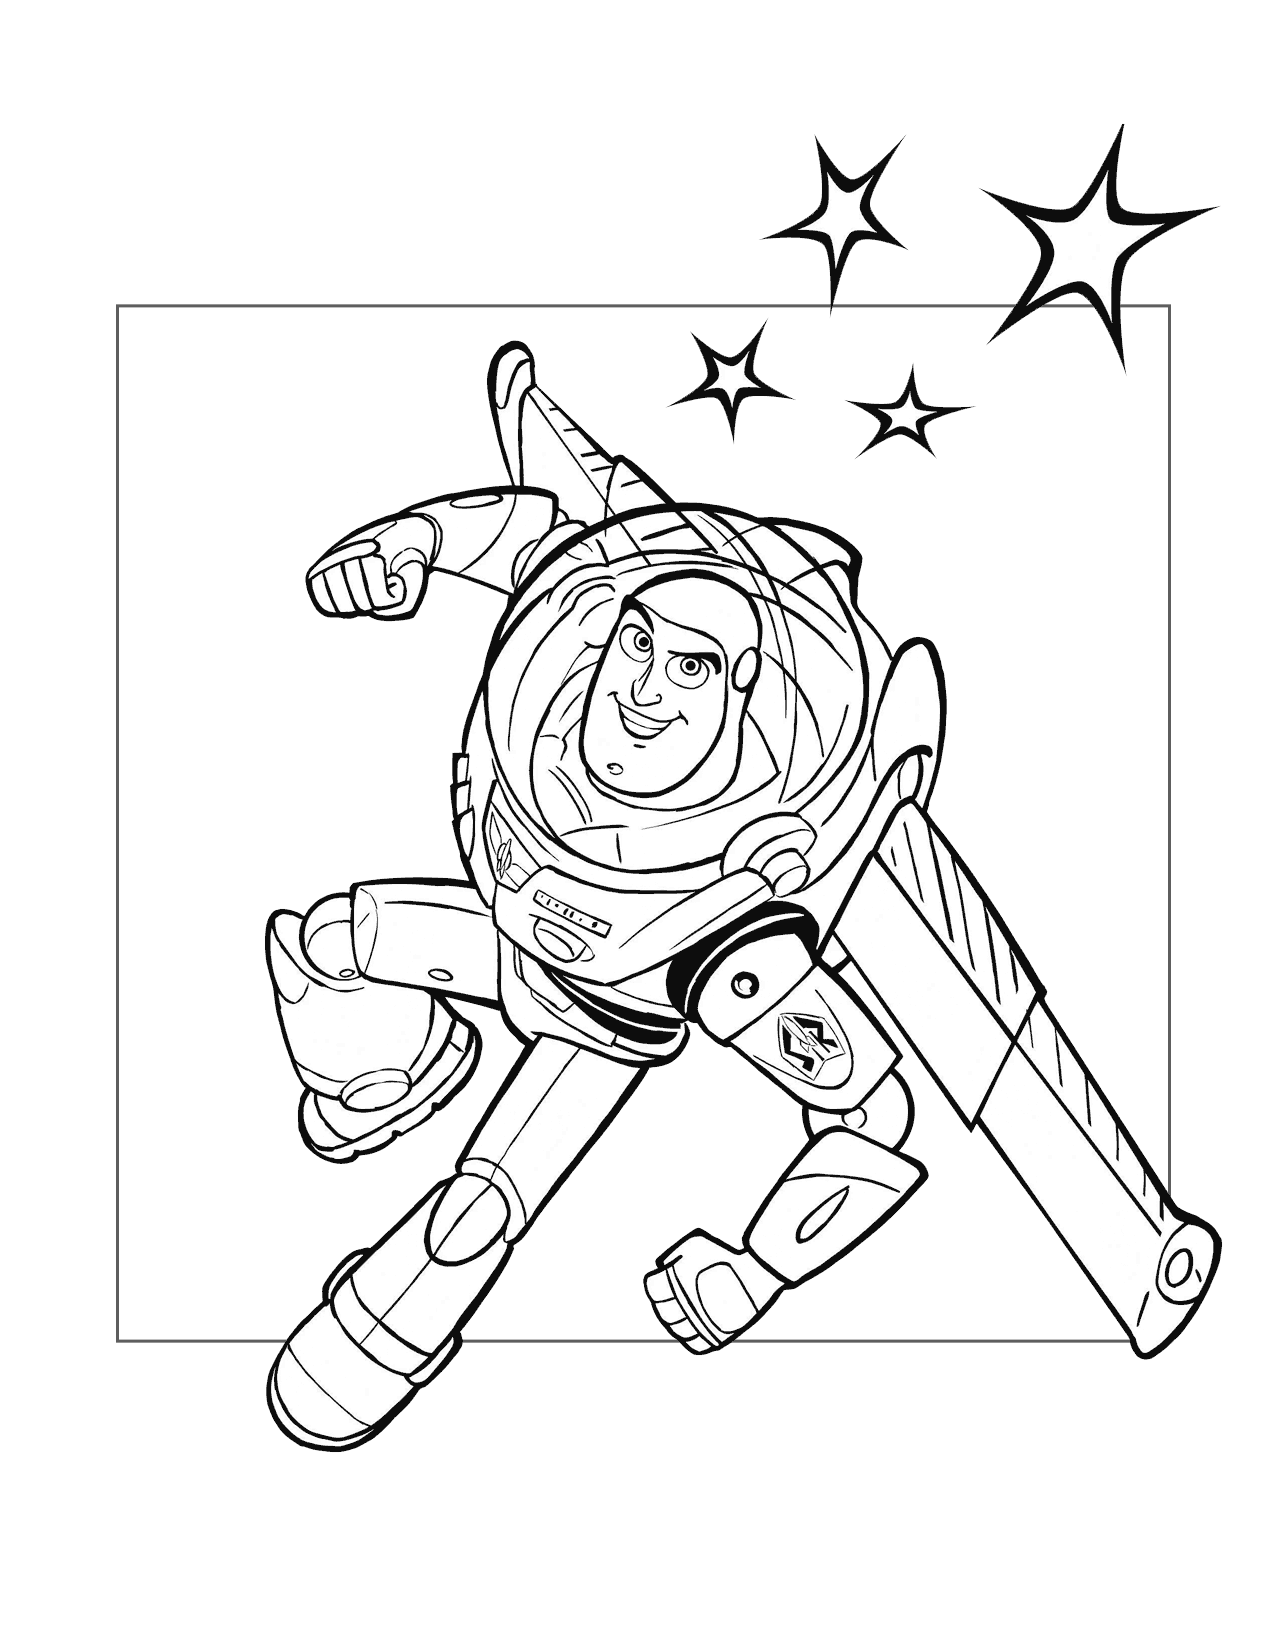 Buzz Lightyear Action Figure Coloring Page